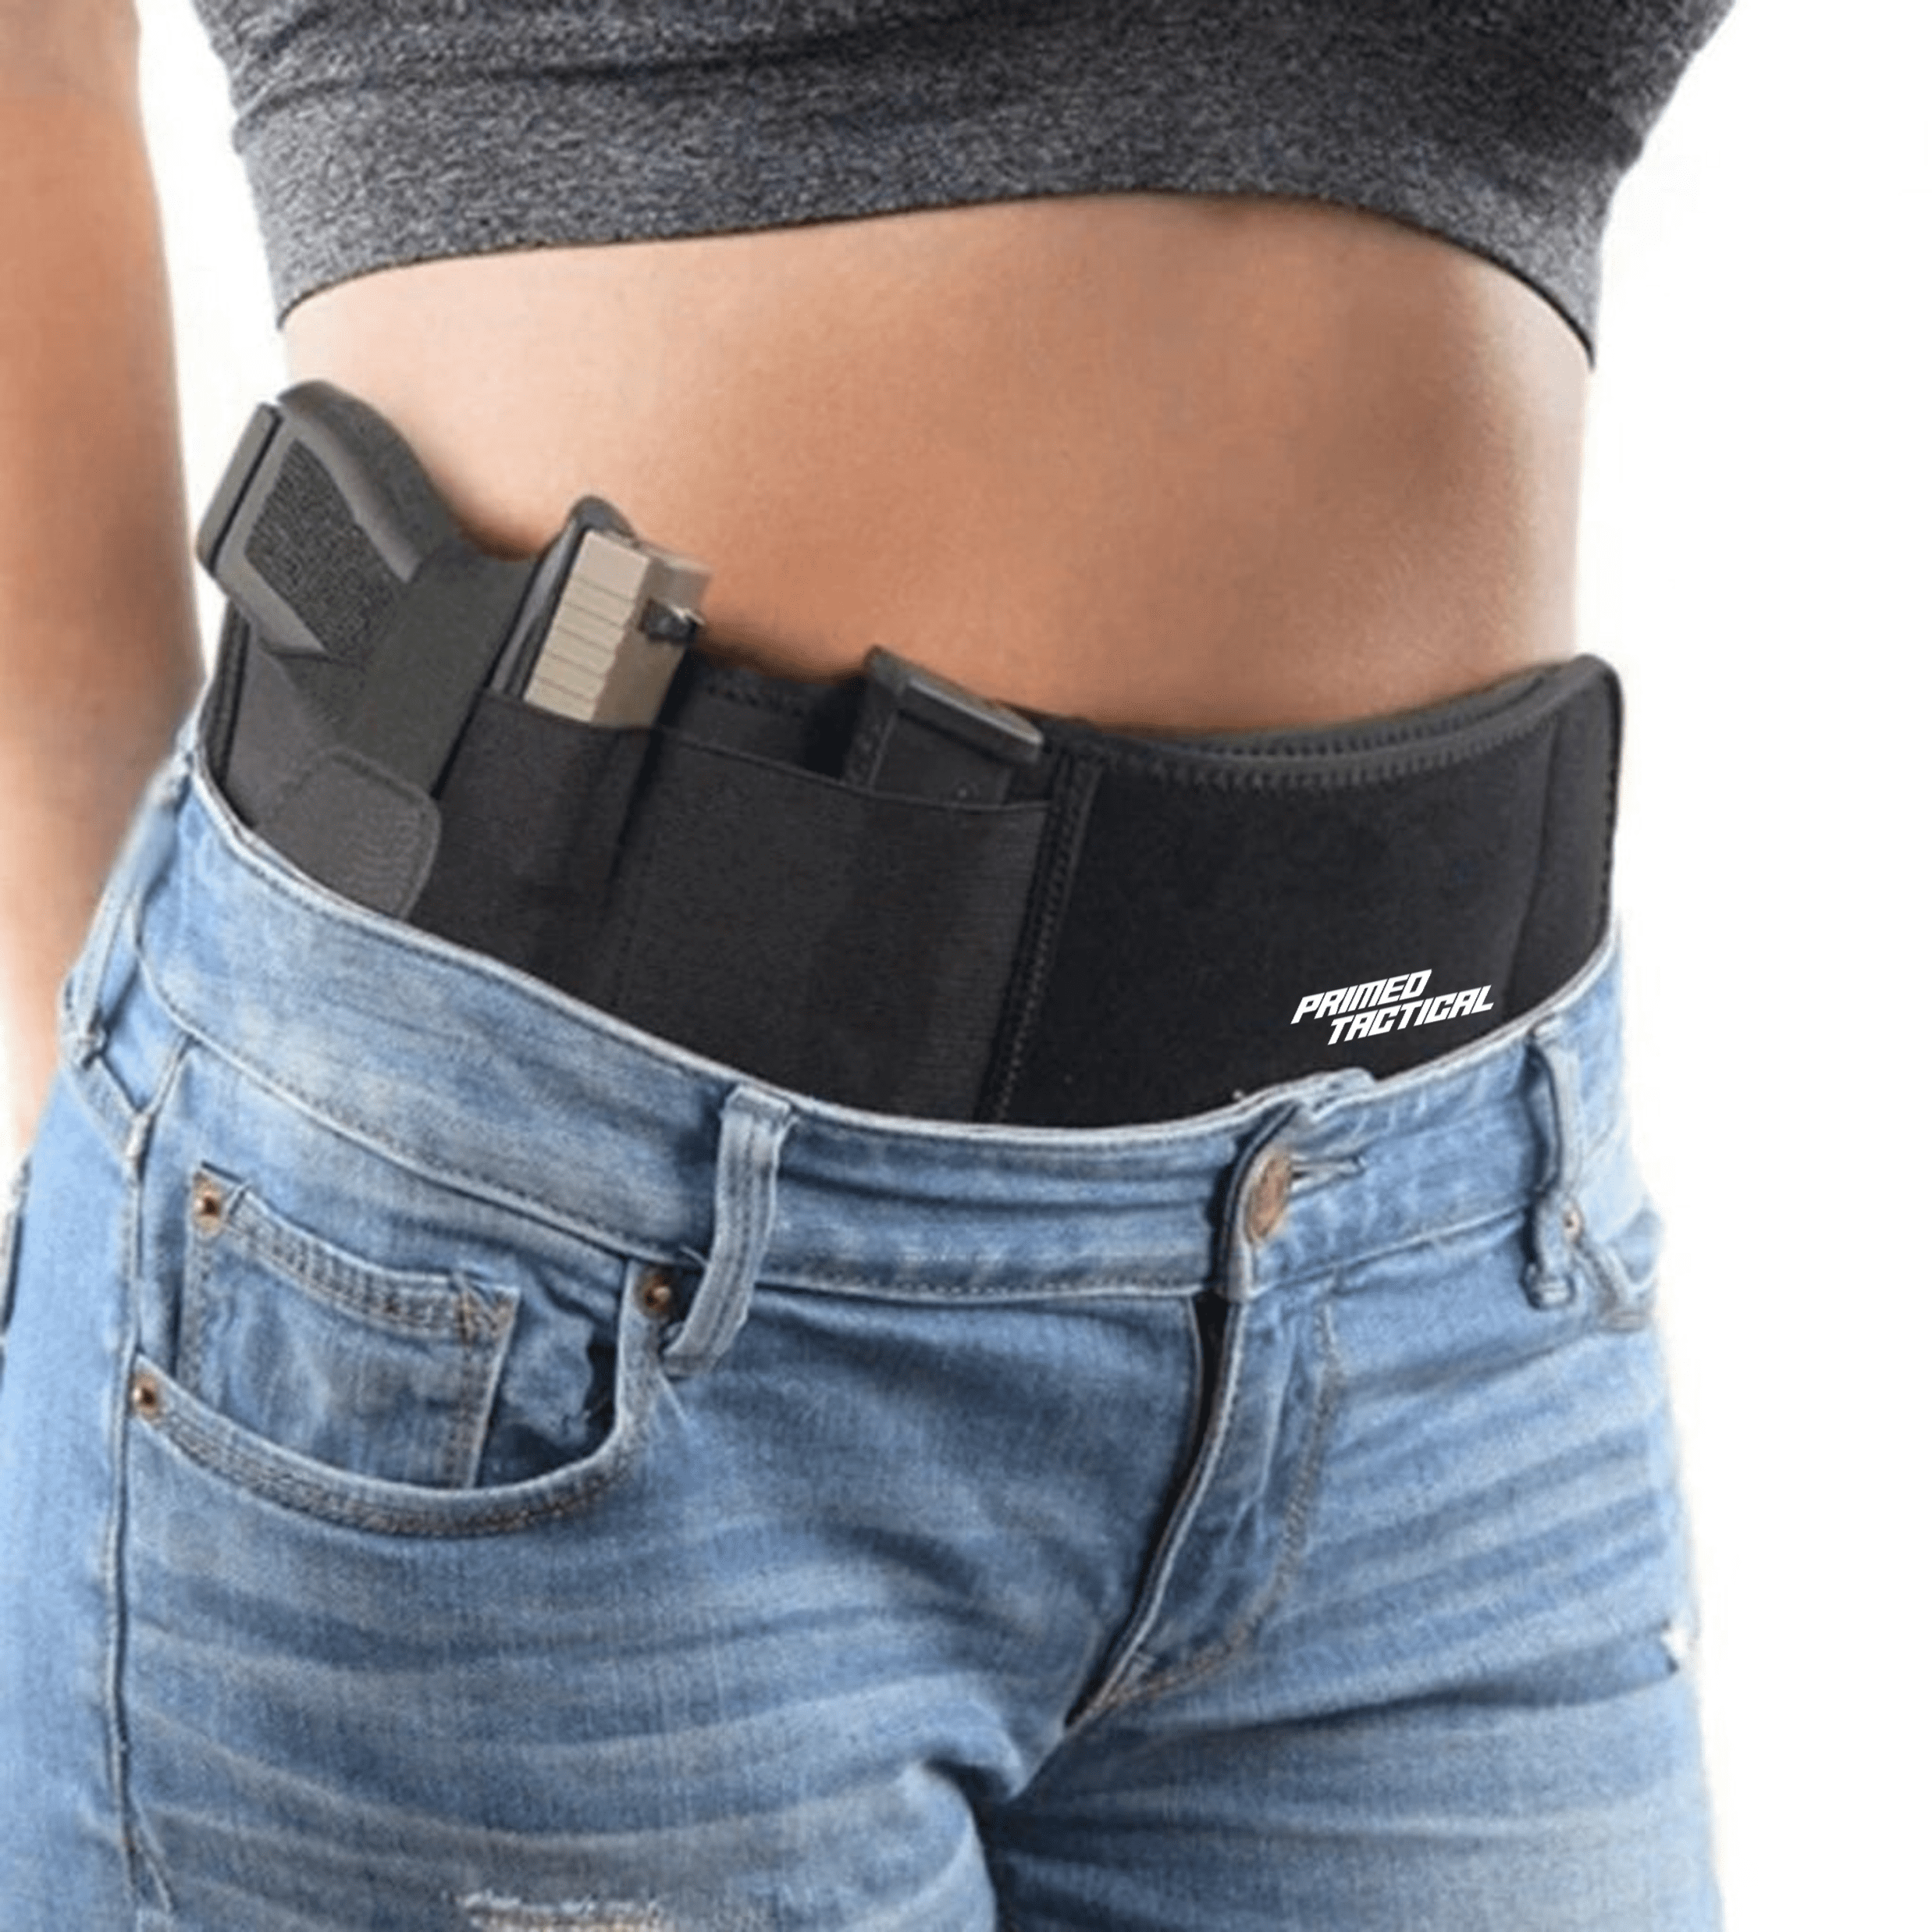 belly band holster by primed tactical